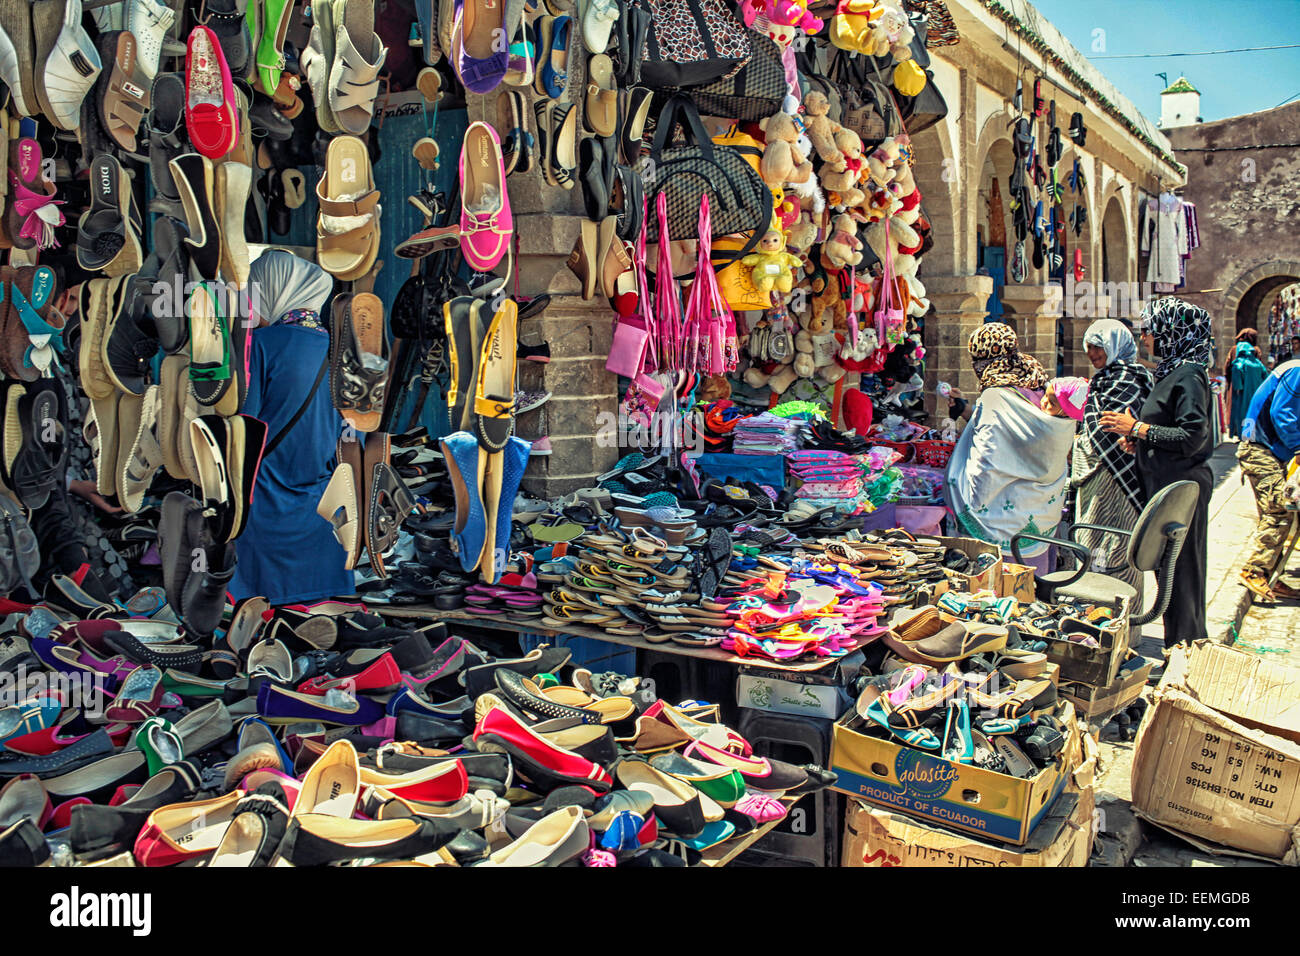 Arab people at a clothes market in Essaouira, Morocco. Stock Photo